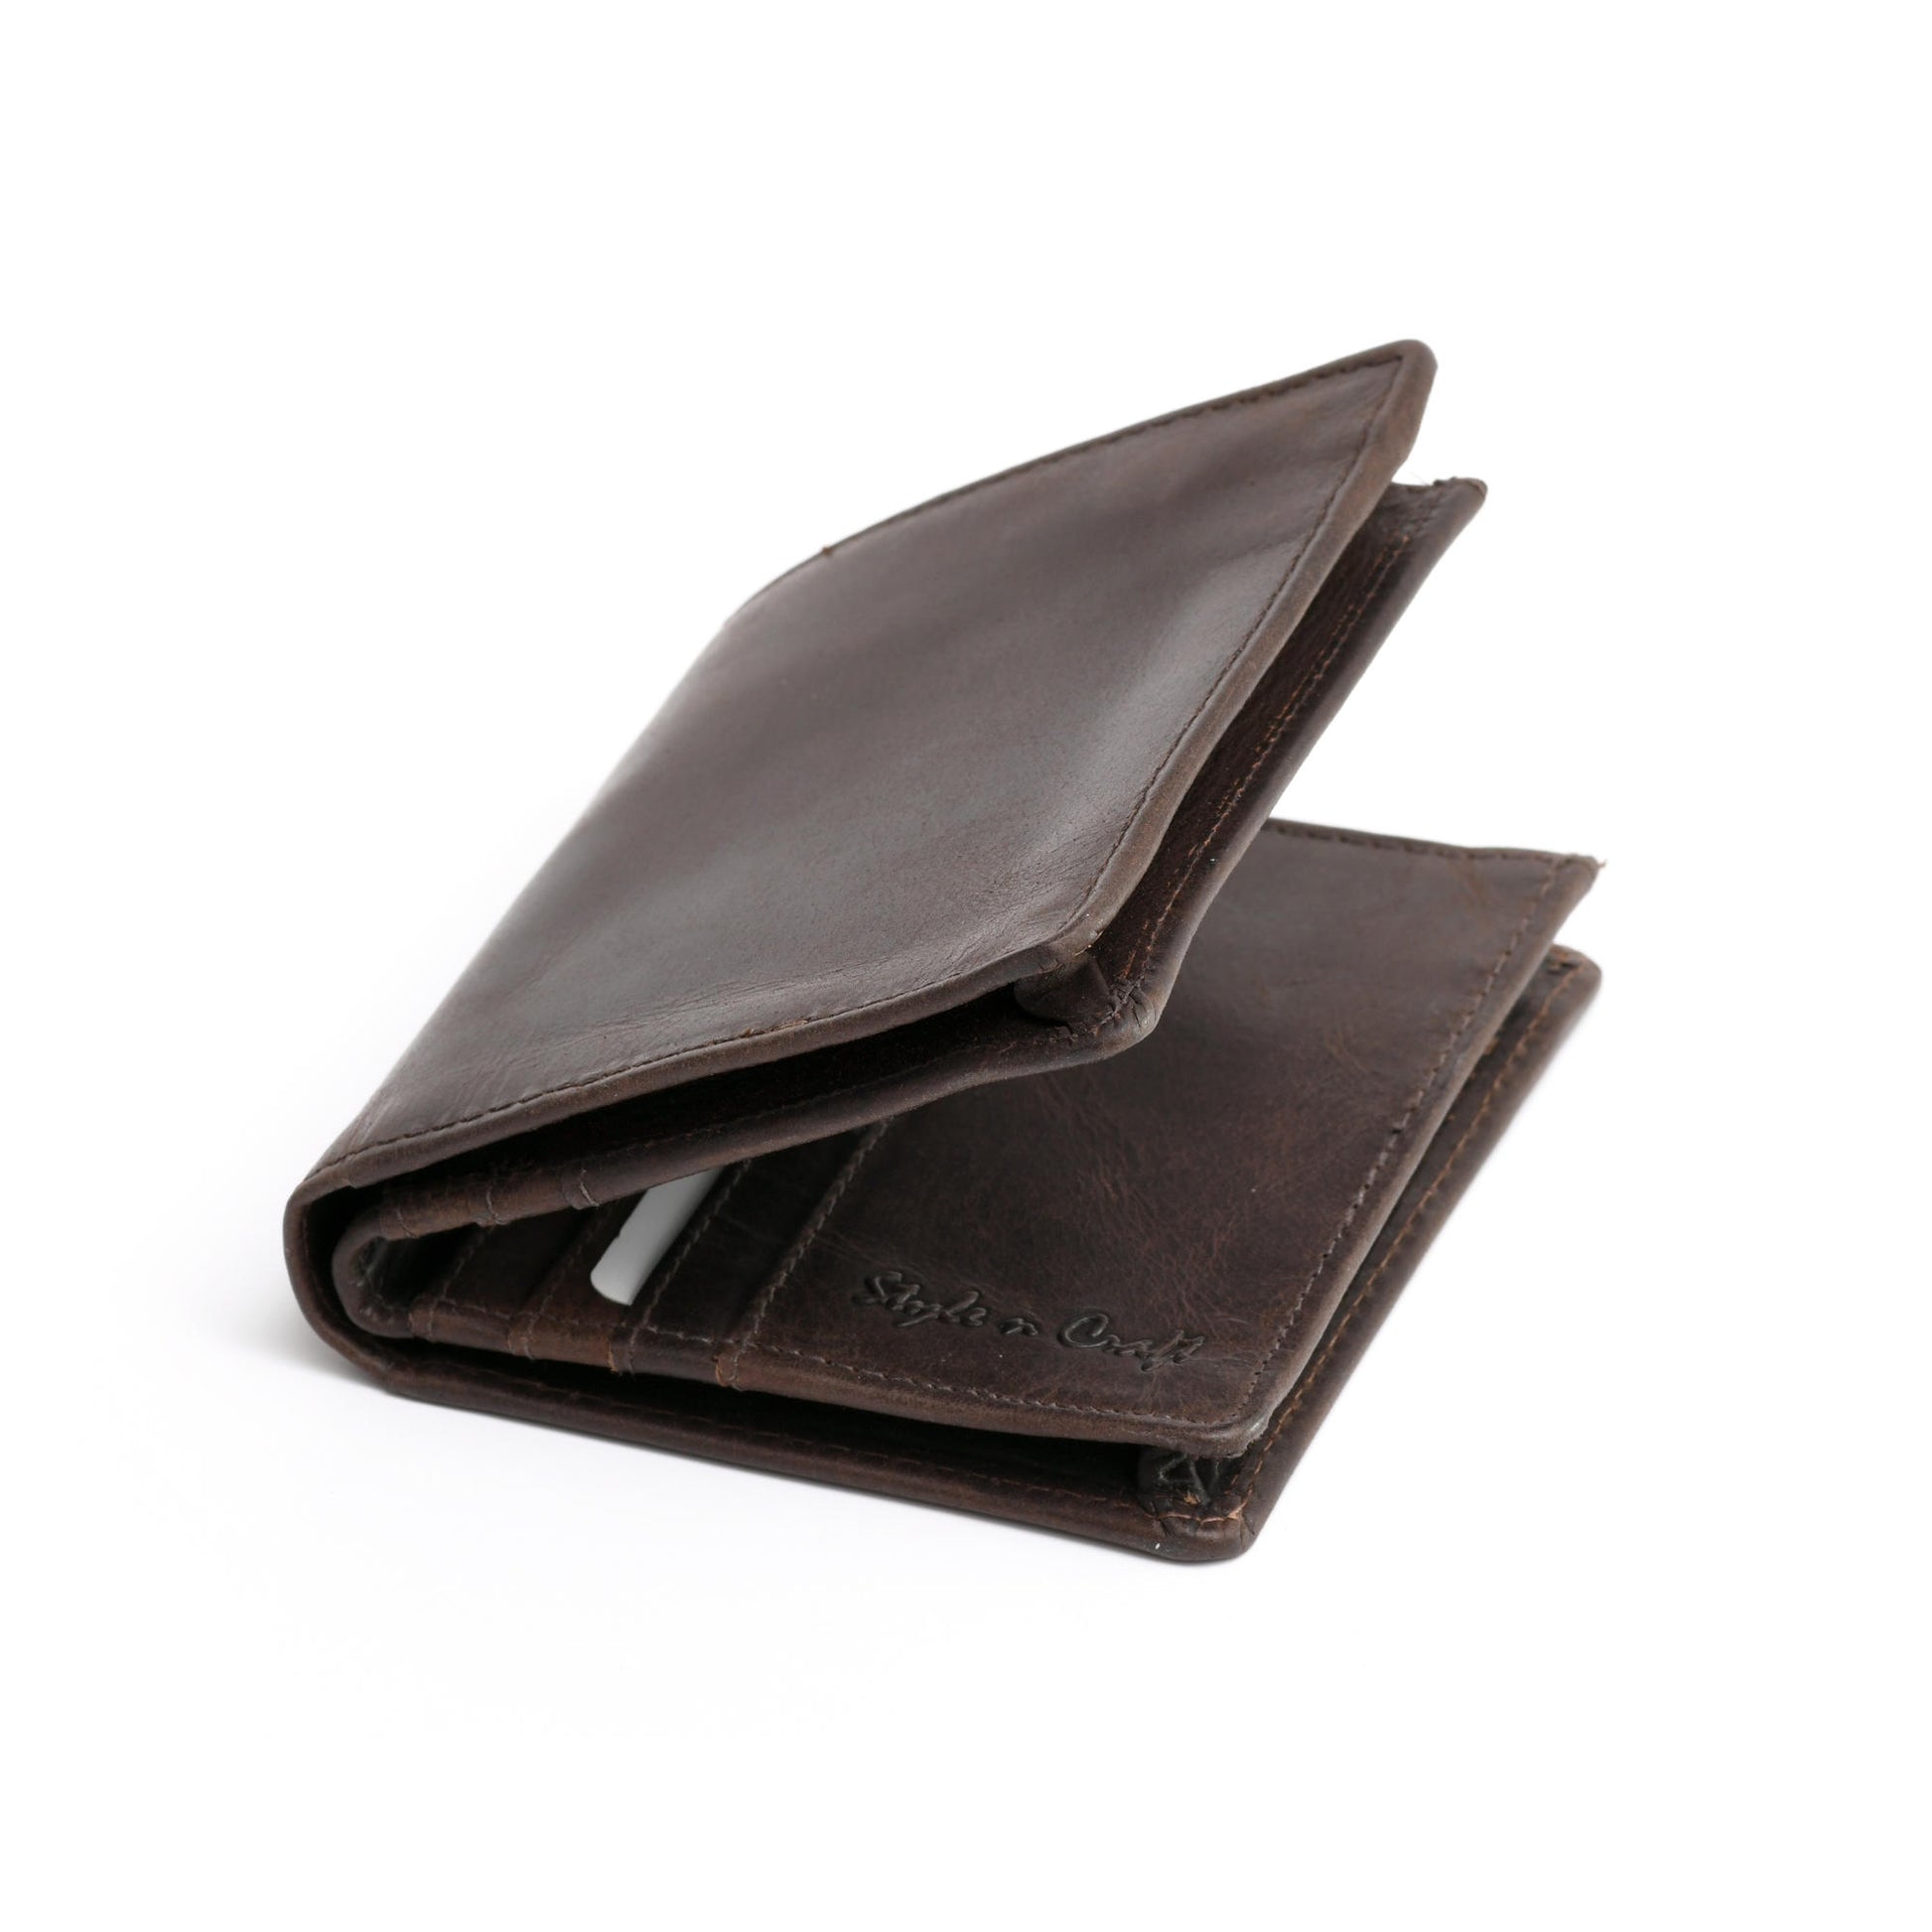 Bifold Hipster Wallet with Zipper Pocket in Dark Brown Leather, Style n  Craft